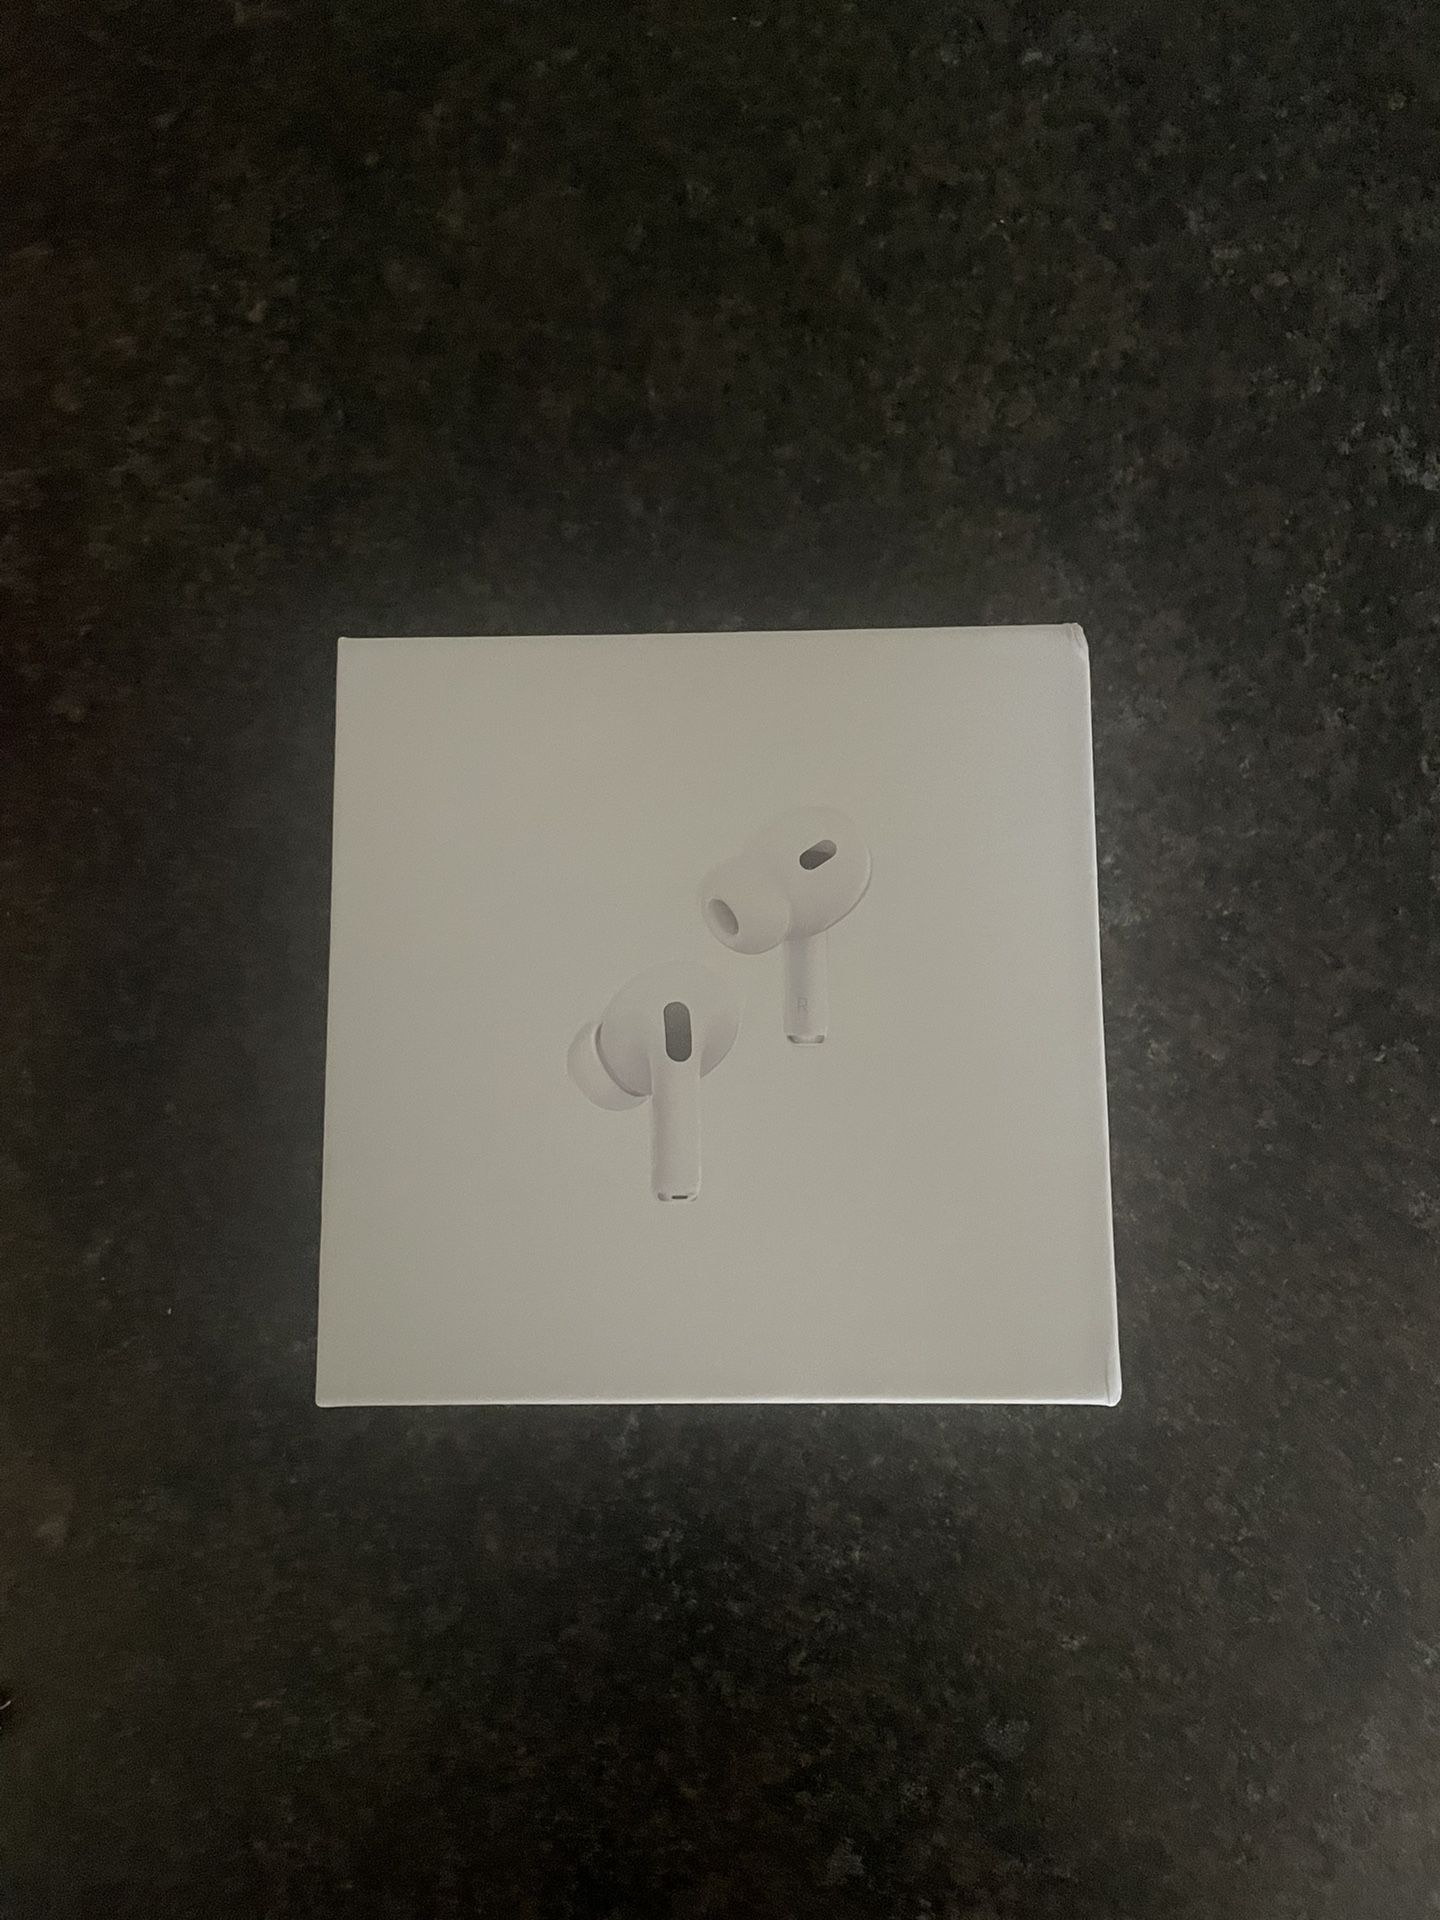 airpod pro gen 2 barely used